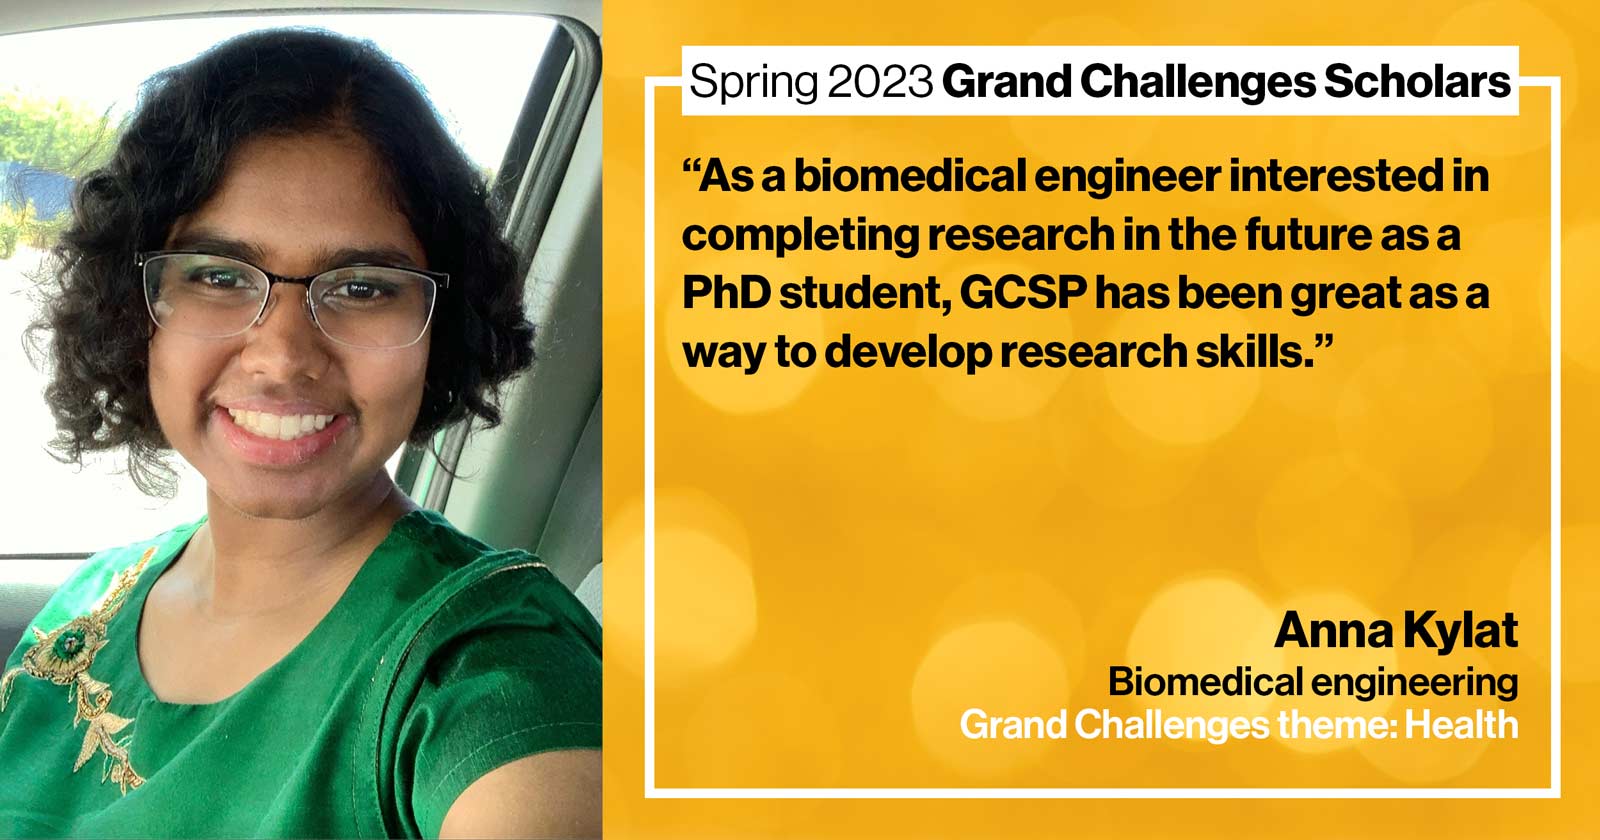 "Anna Kylat Biomedical engineering Grand Challenge: Health Quote: “As a biomedical engineer interested in completing research in the future as a PhD student, GCSP has been great as a way to develop research skills.”"